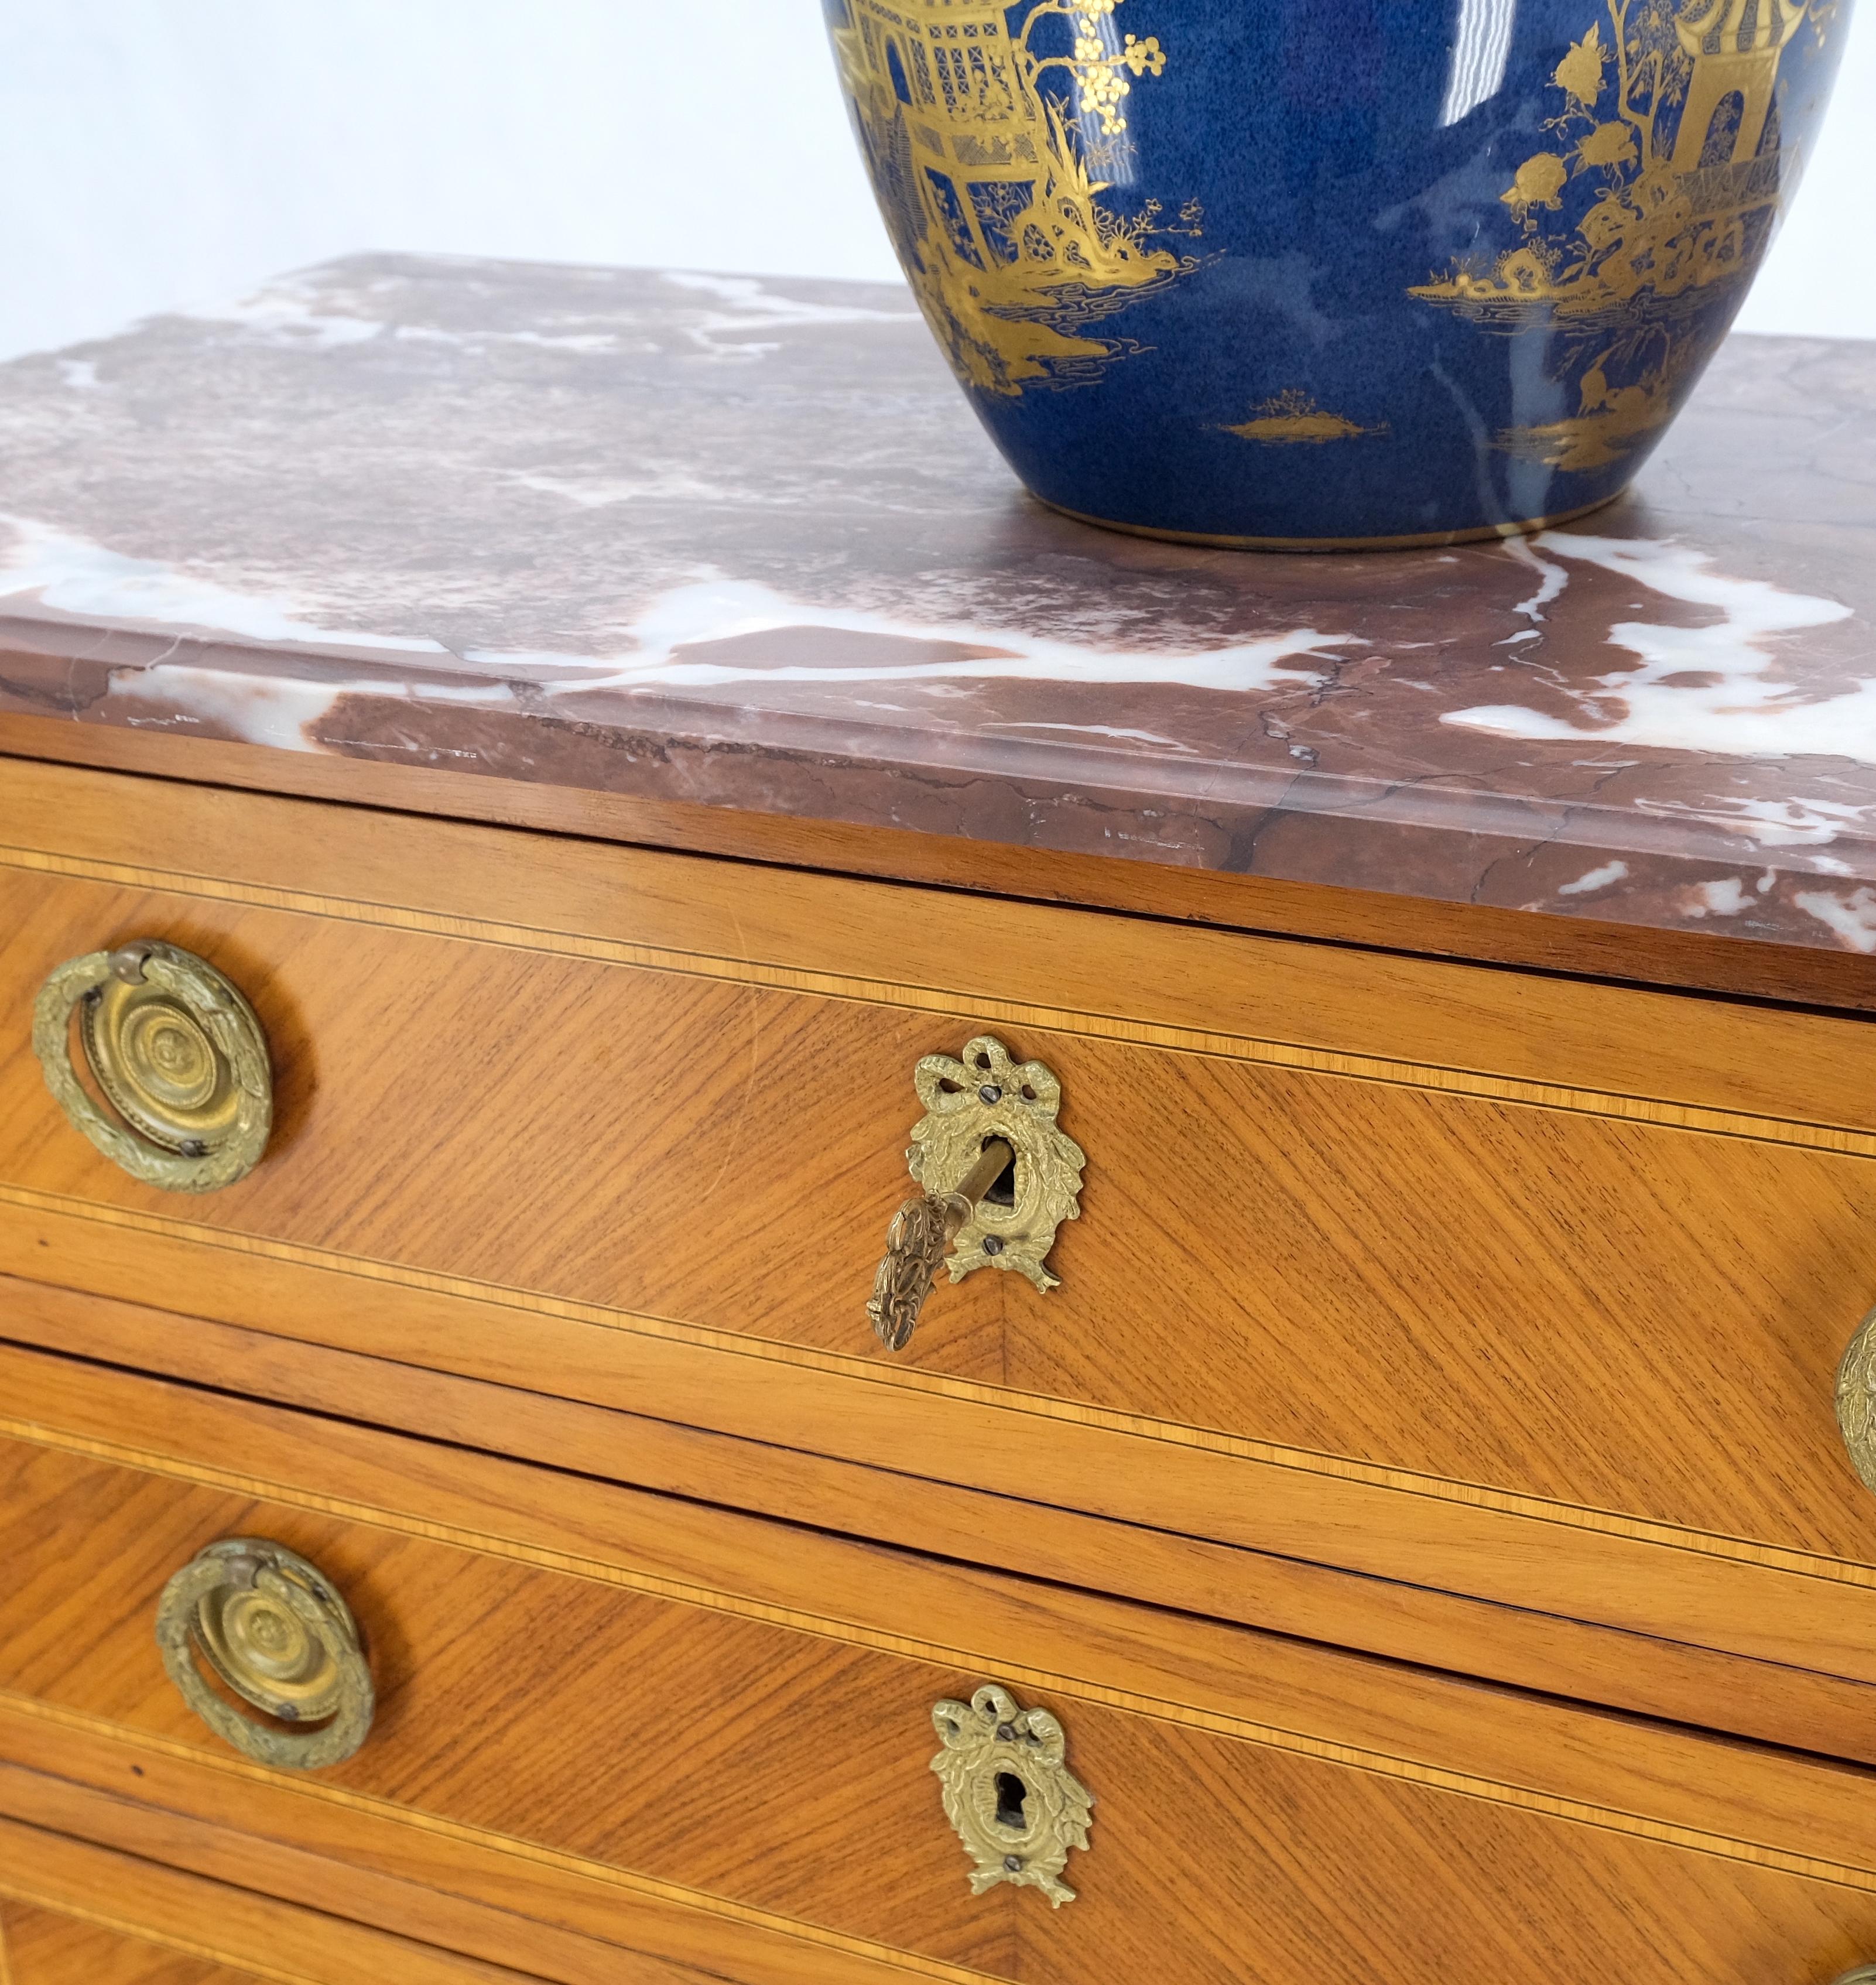 French Empire marble top bronze mounted lingerie chest tall narrow 8 drawers dresser mint!
Bronze ring shape drop pulls.